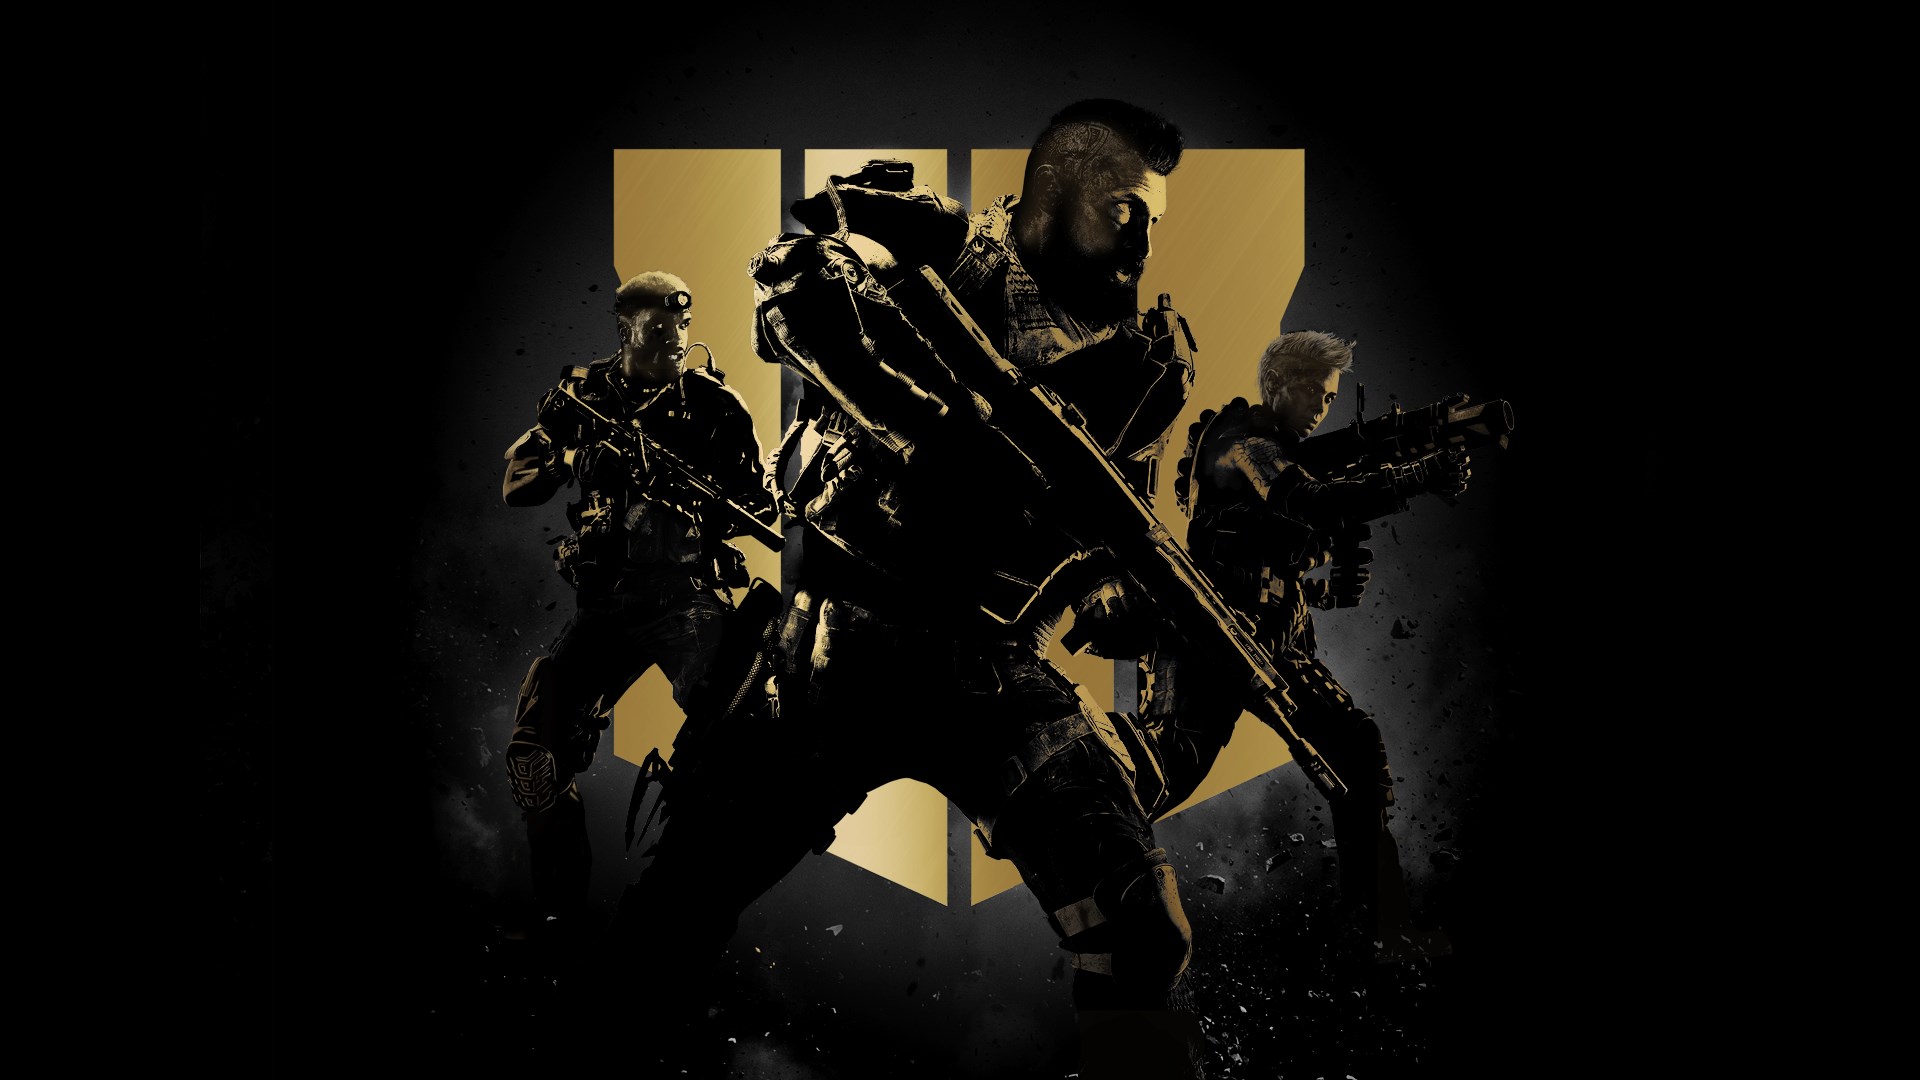 call of duty black ops 4 for sale